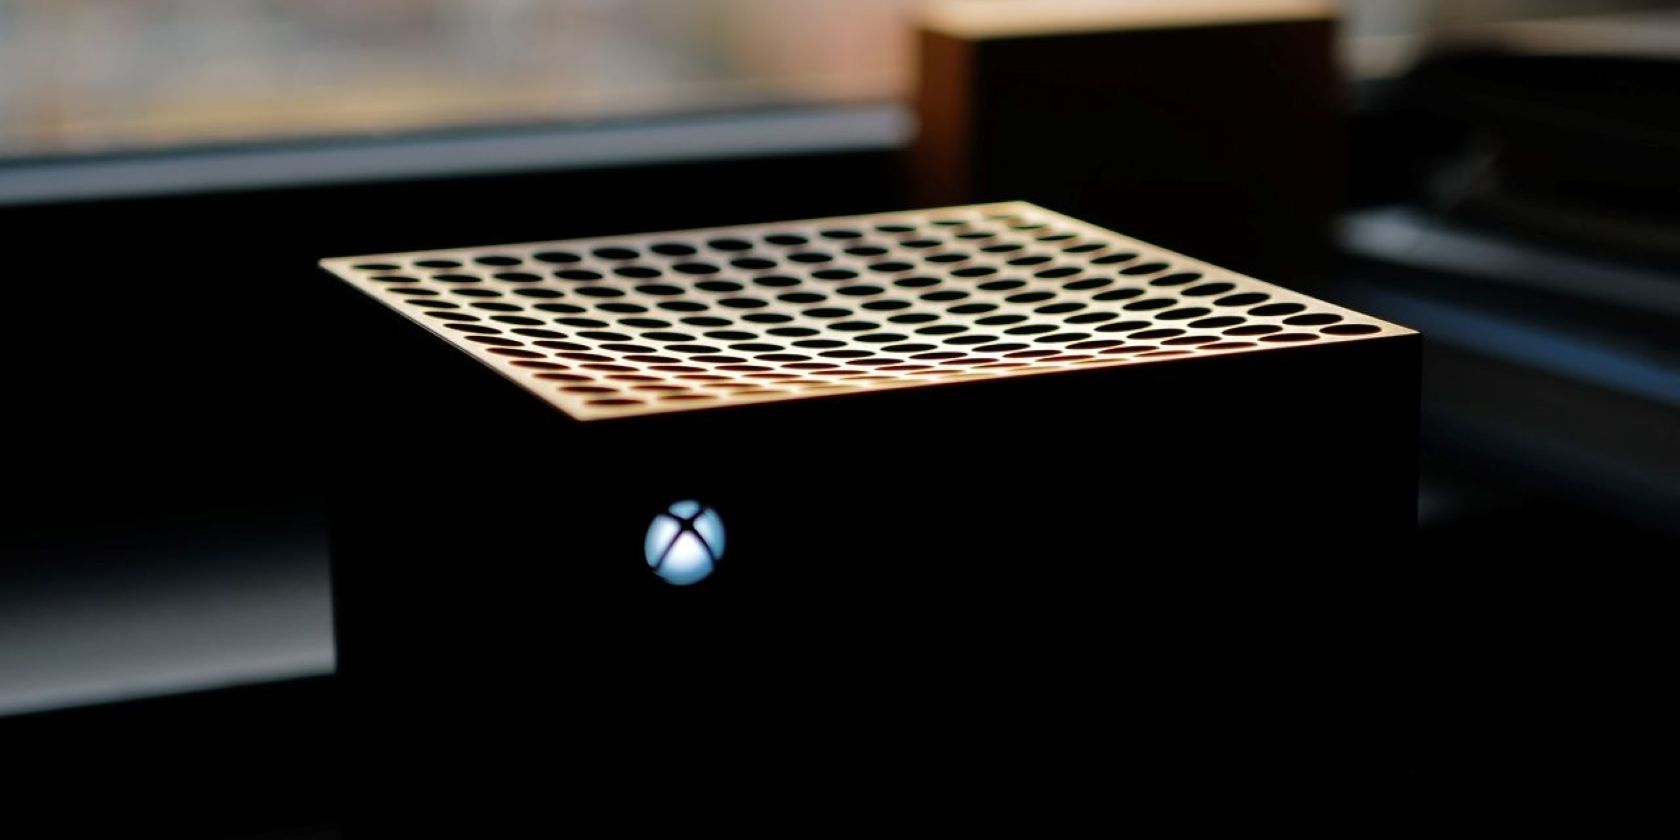 A close up photograph of the top half of an Xbox Series X console